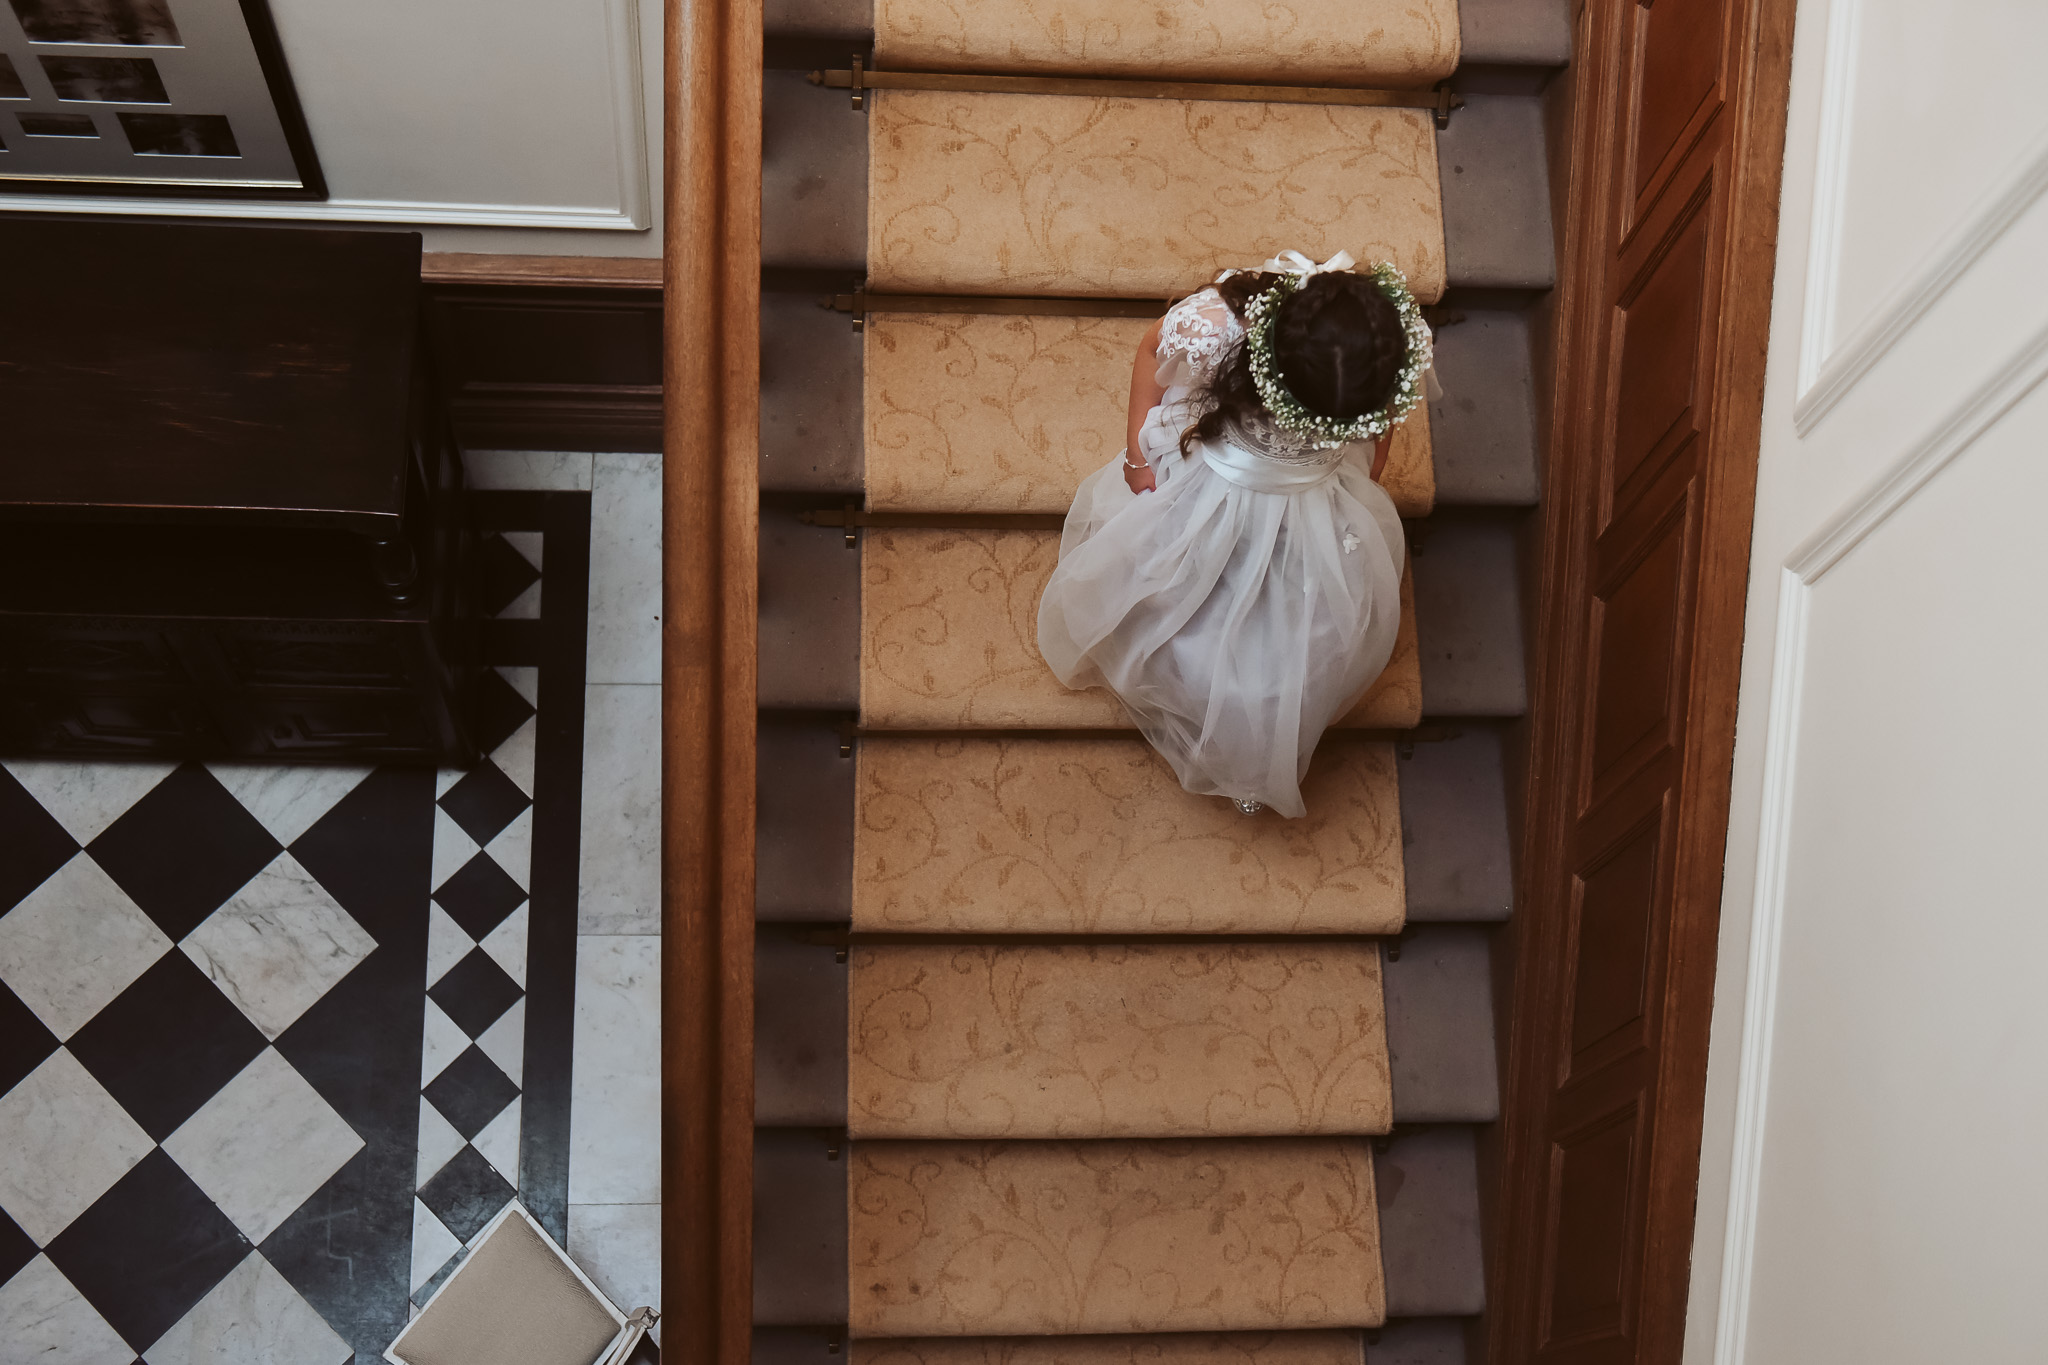 Flower girl makes her way down the grand staircase